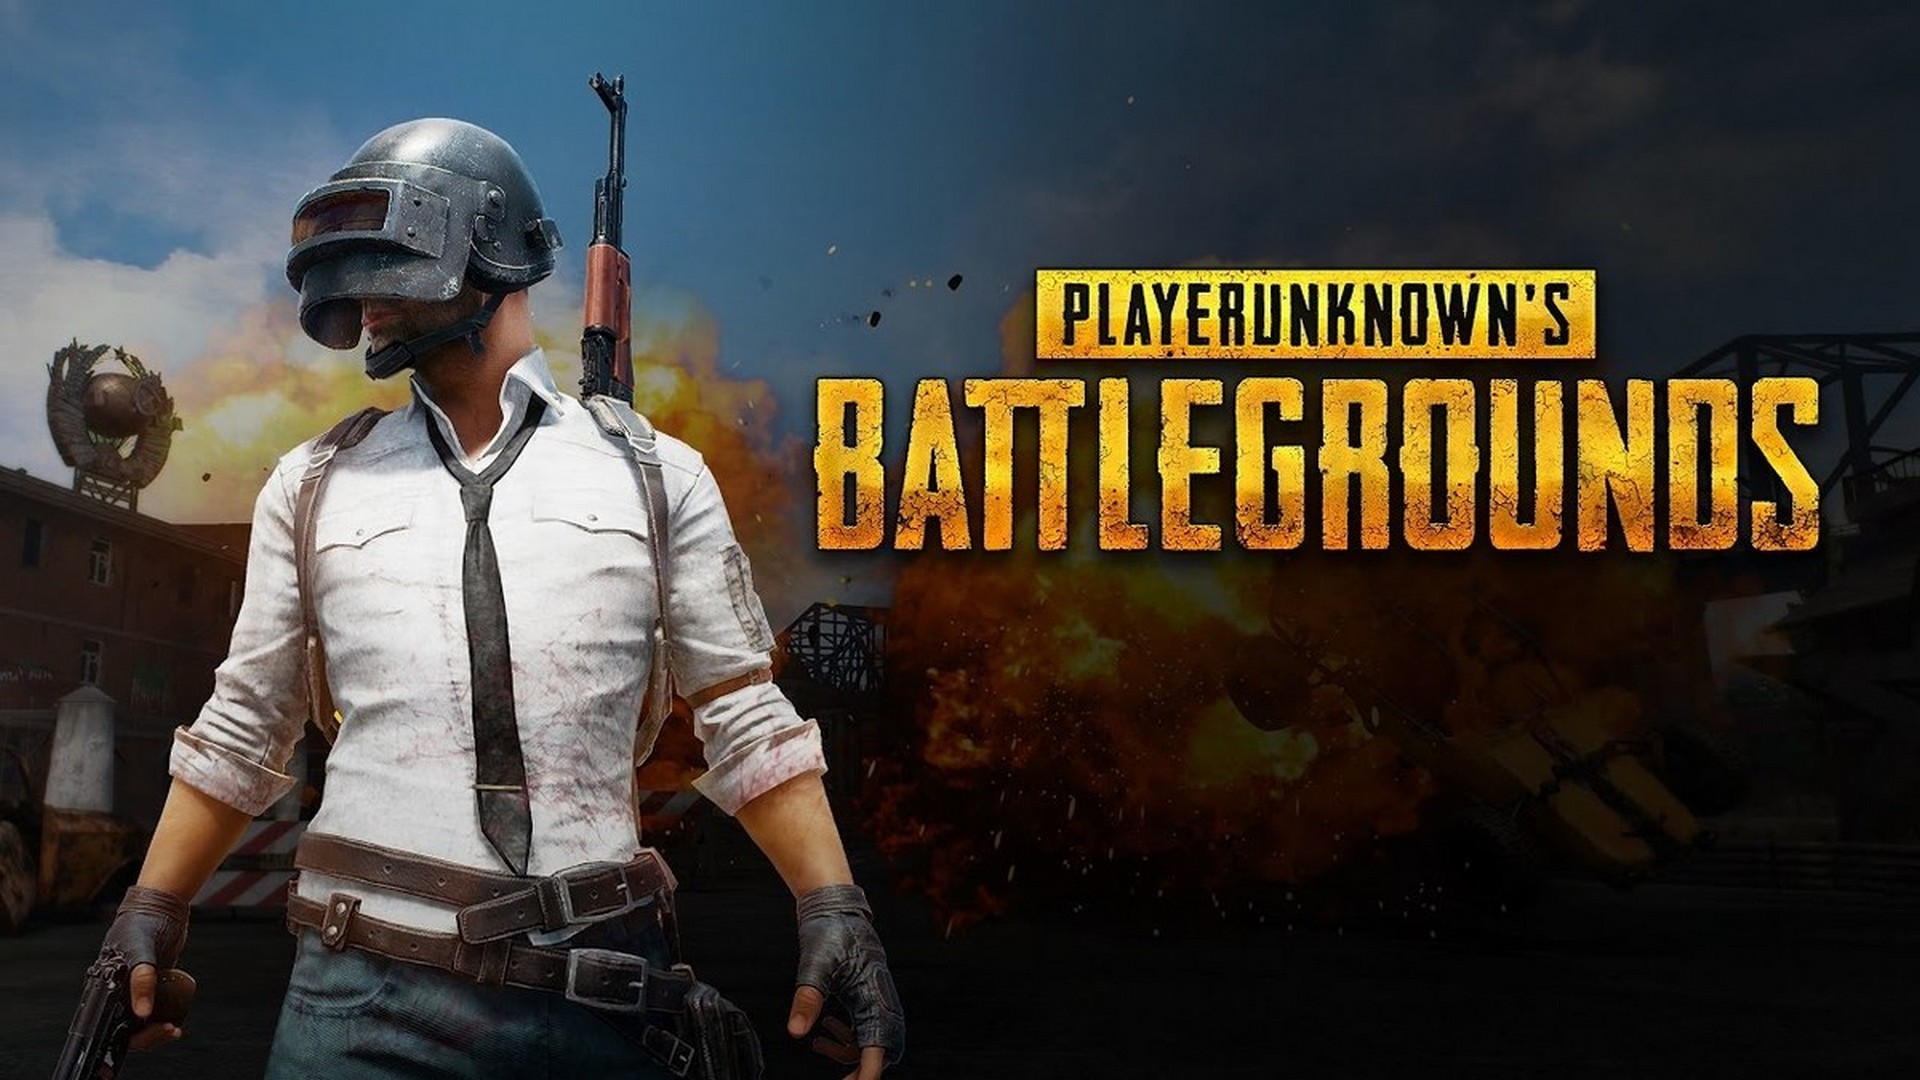 Wallpaper PUBG Update Xbox One Desktop with image resolution 1920x1080 pixel. You can use this wallpaper as background for your desktop Computer Screensavers, Android or iPhone smartphones